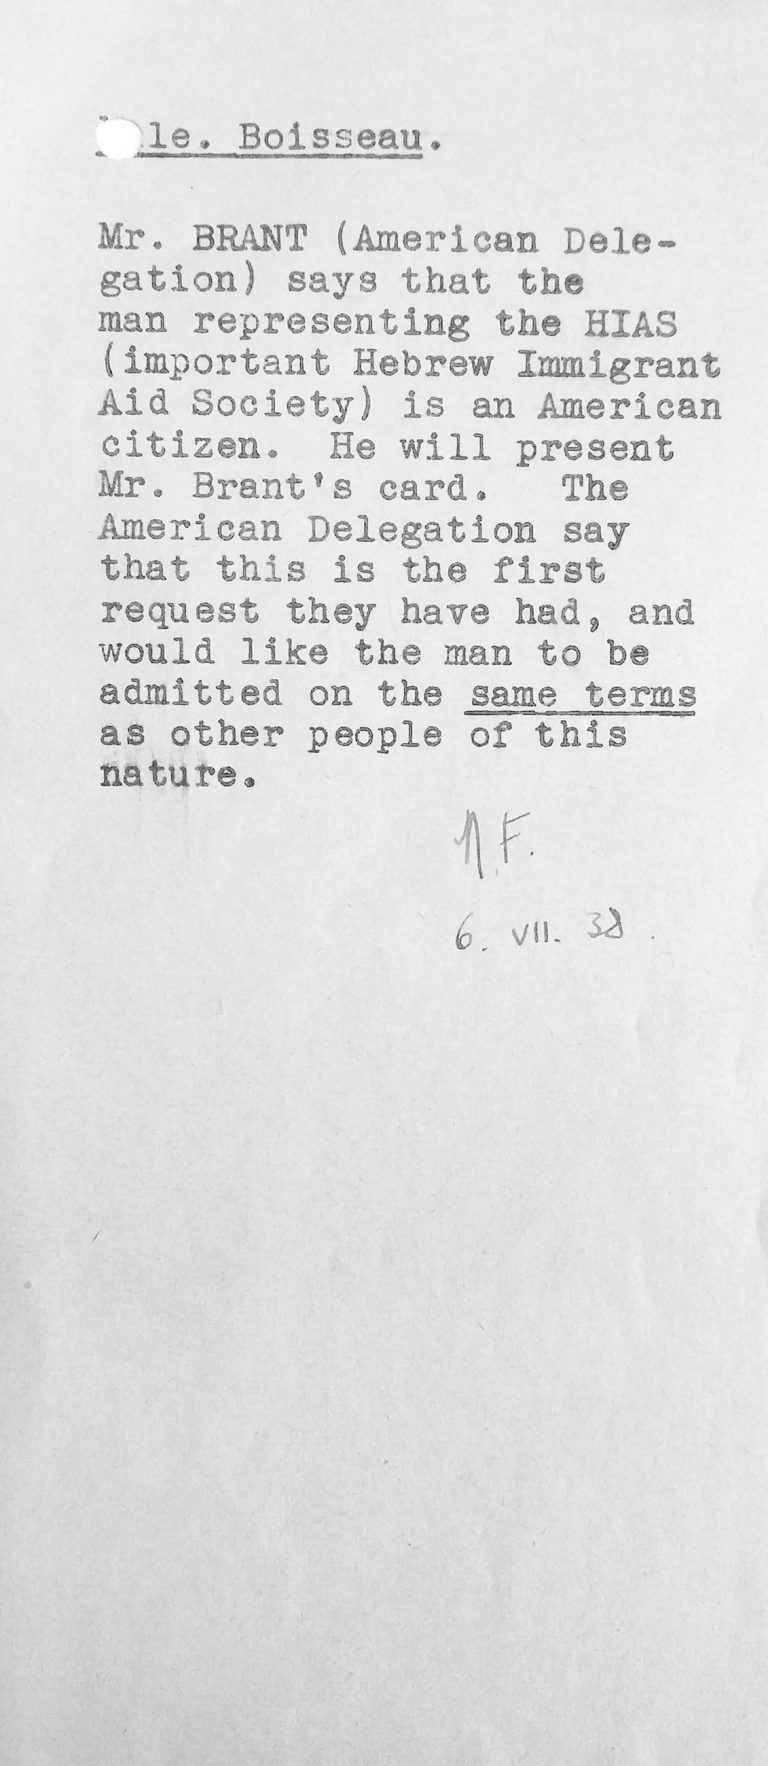 Brandt’s request for admission of the representative of the Hebrew Sheltering and Immigrant Aid Society (HIAS) to the conference, July 6, 1938 United Nations Archives, Genf